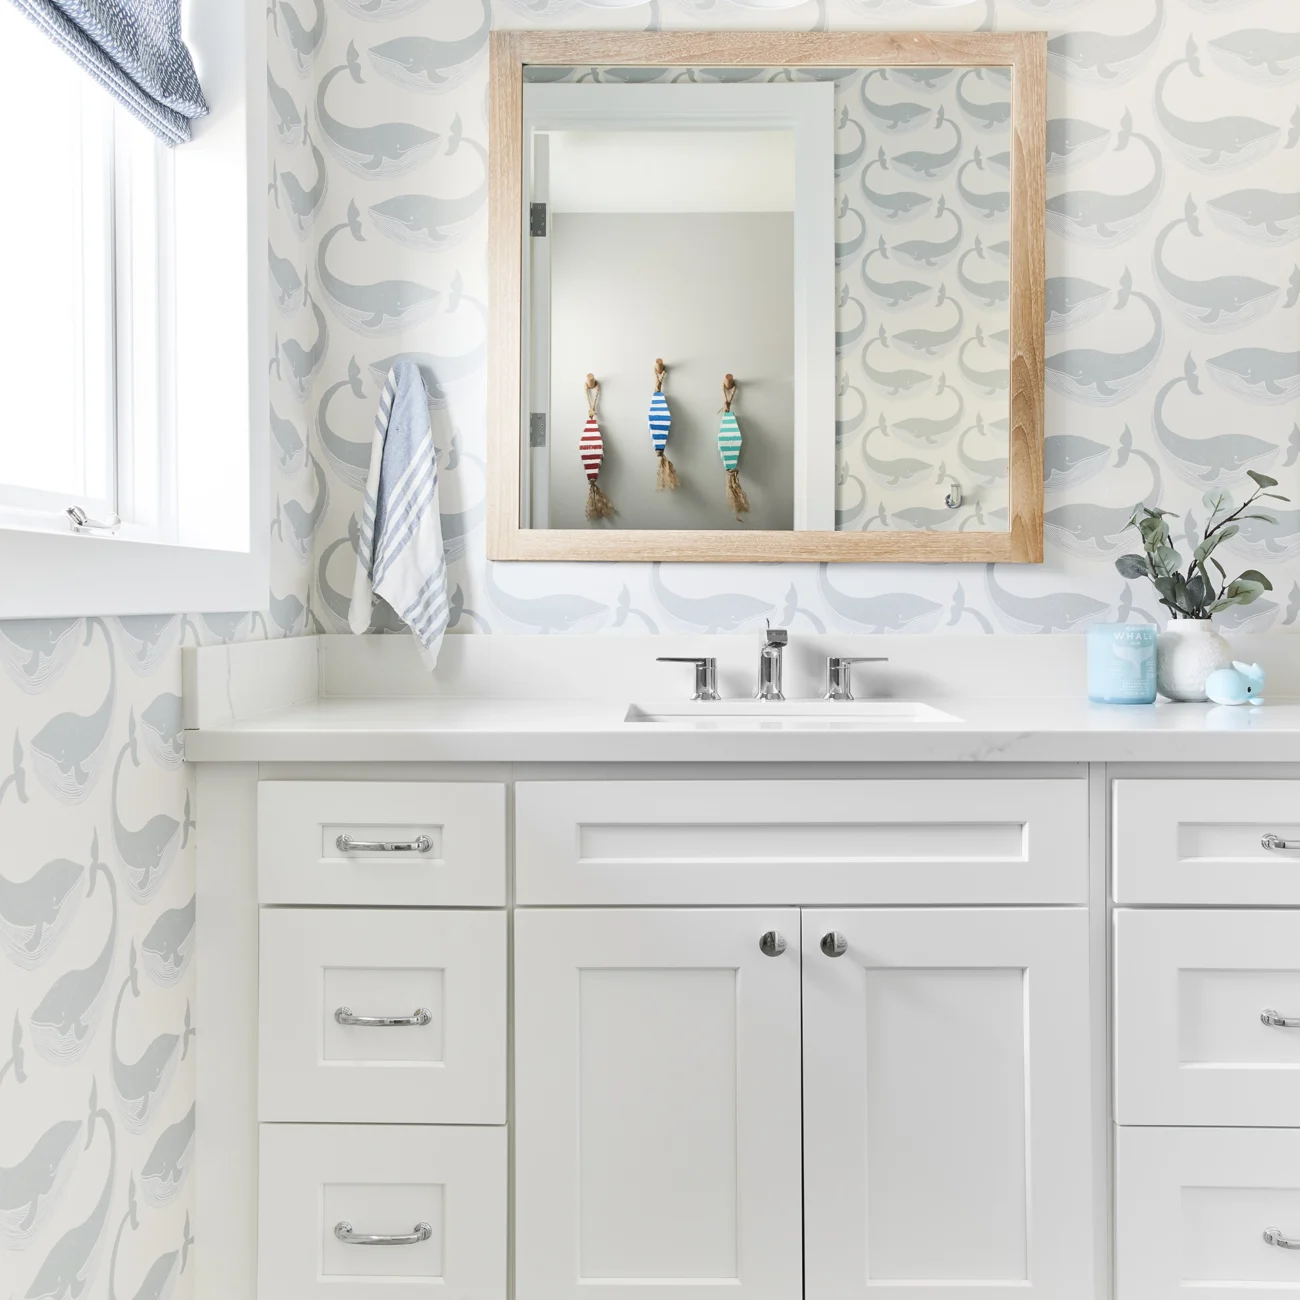 Christine Vroom Interiors | 27th | bright, costal bathroom with whale wallpaper